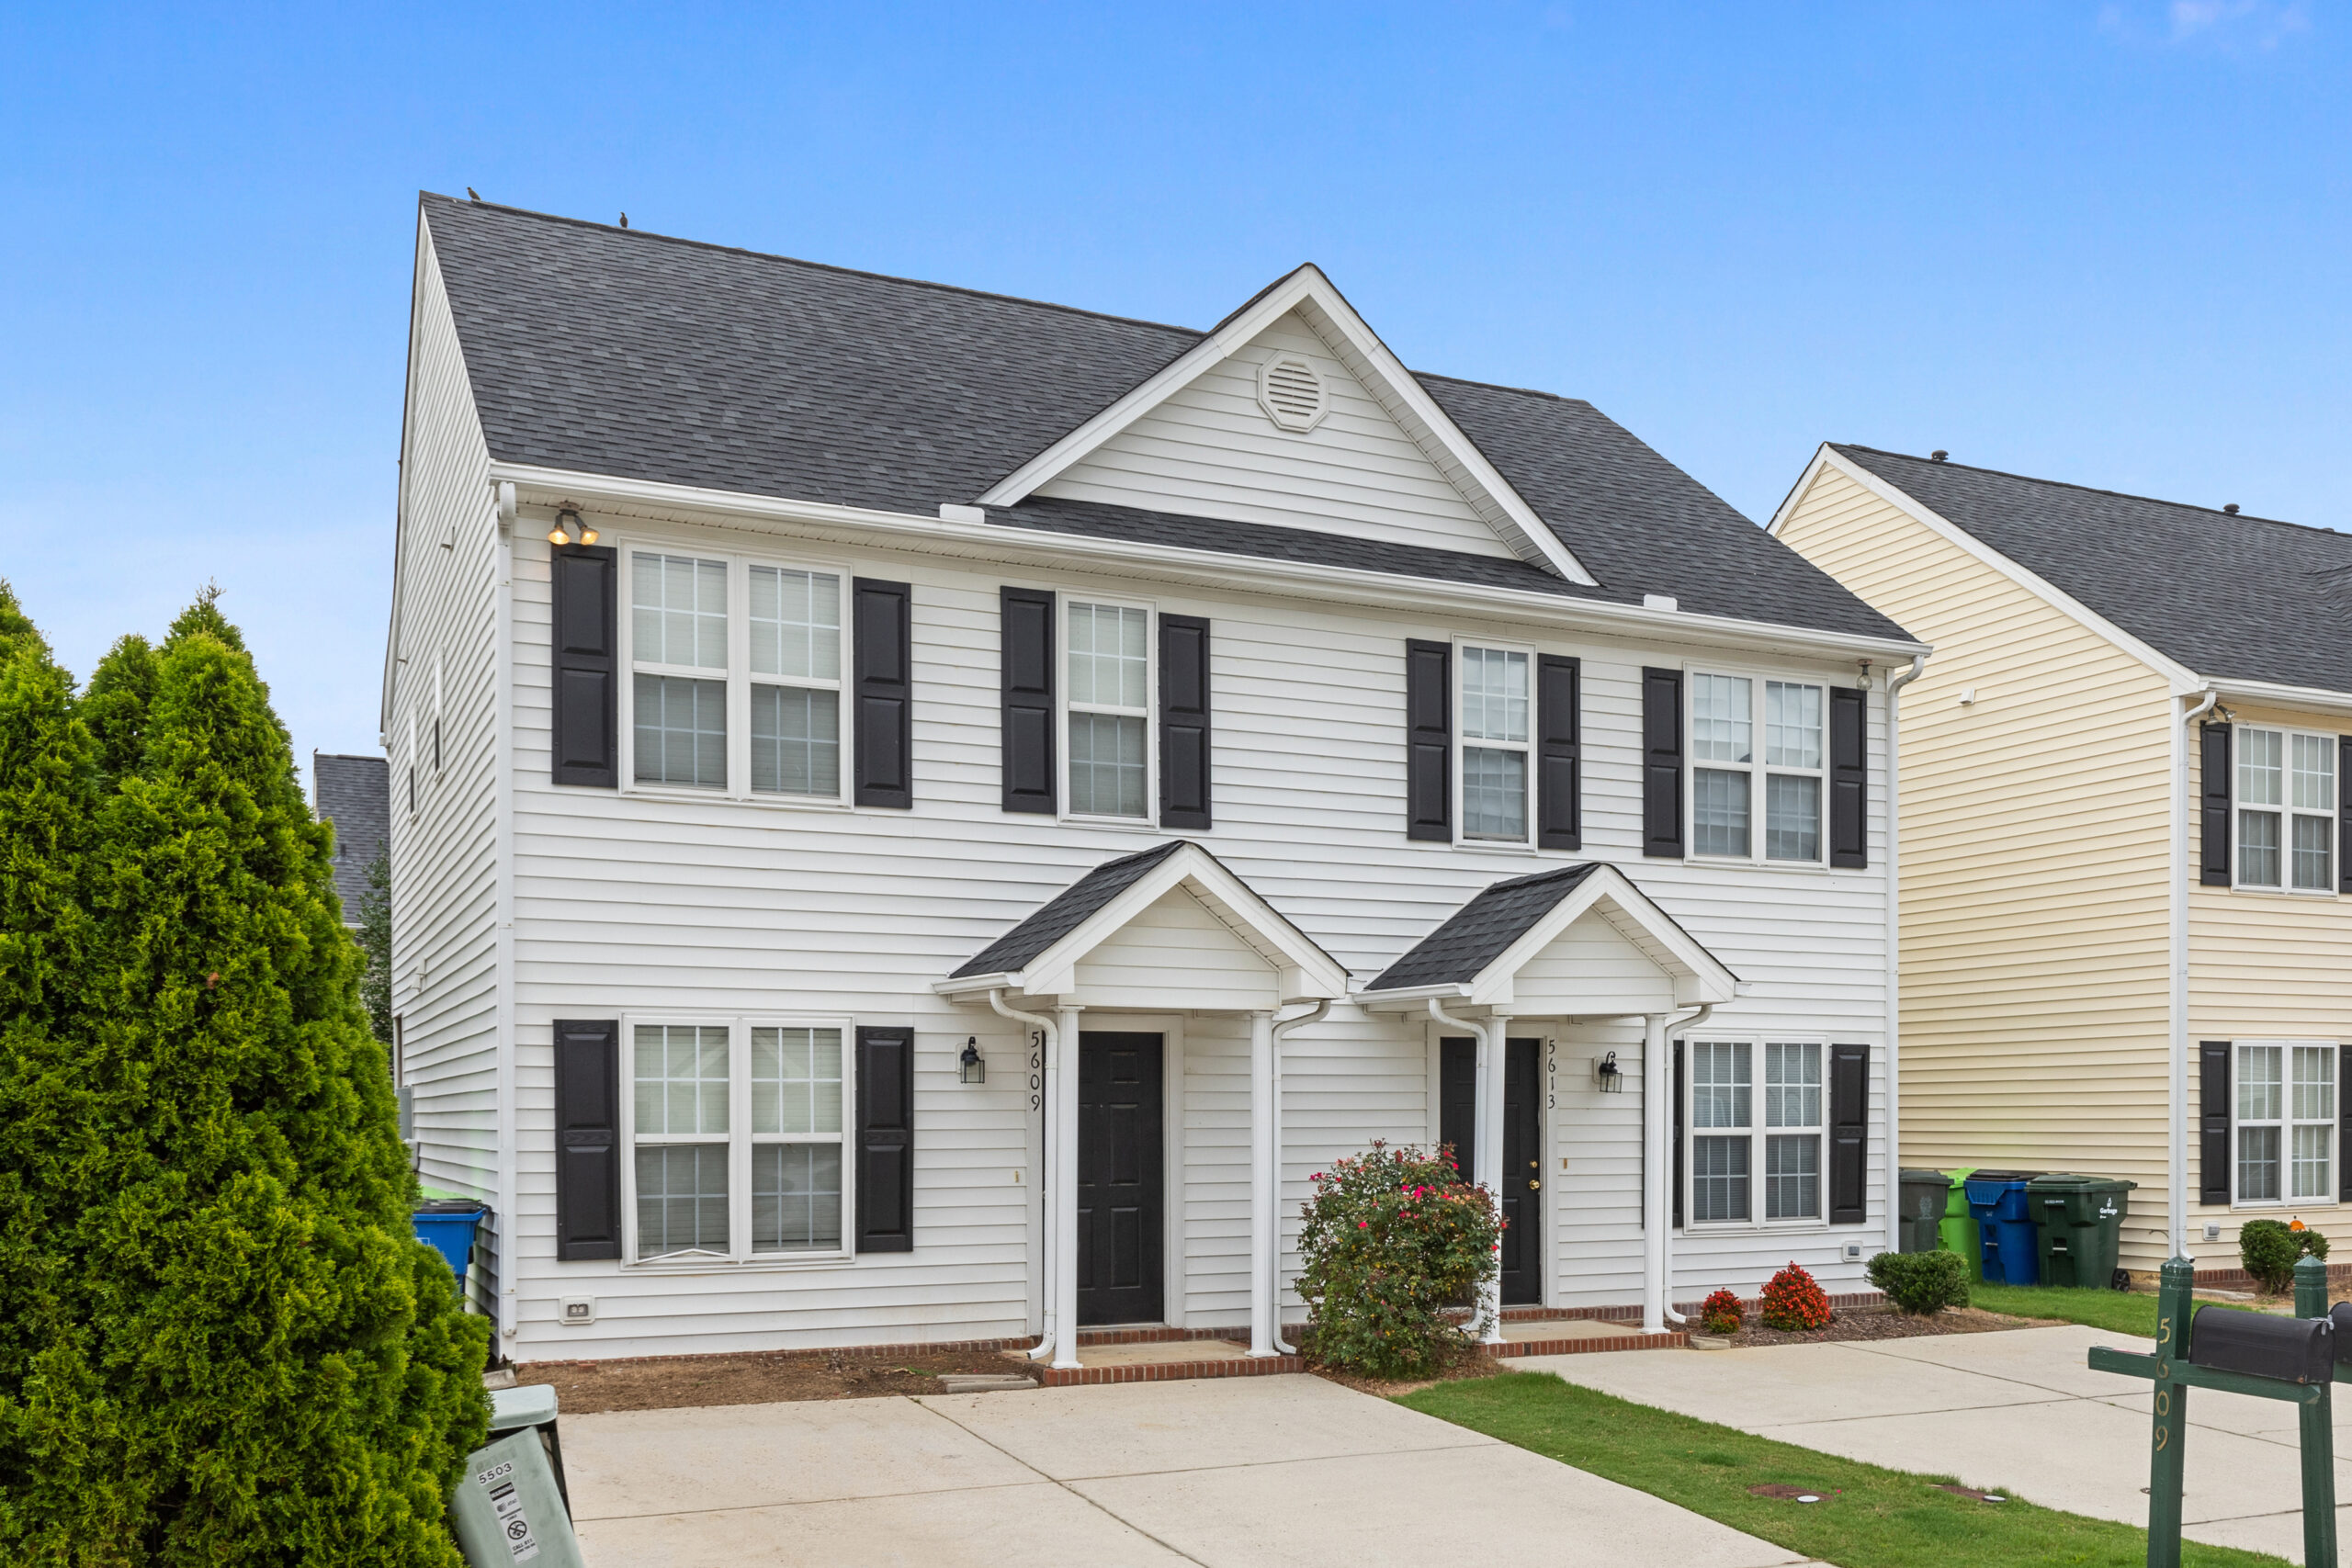 Blackwolf Run is a 329-unit townhome rental community located in Raleigh, North Carolina